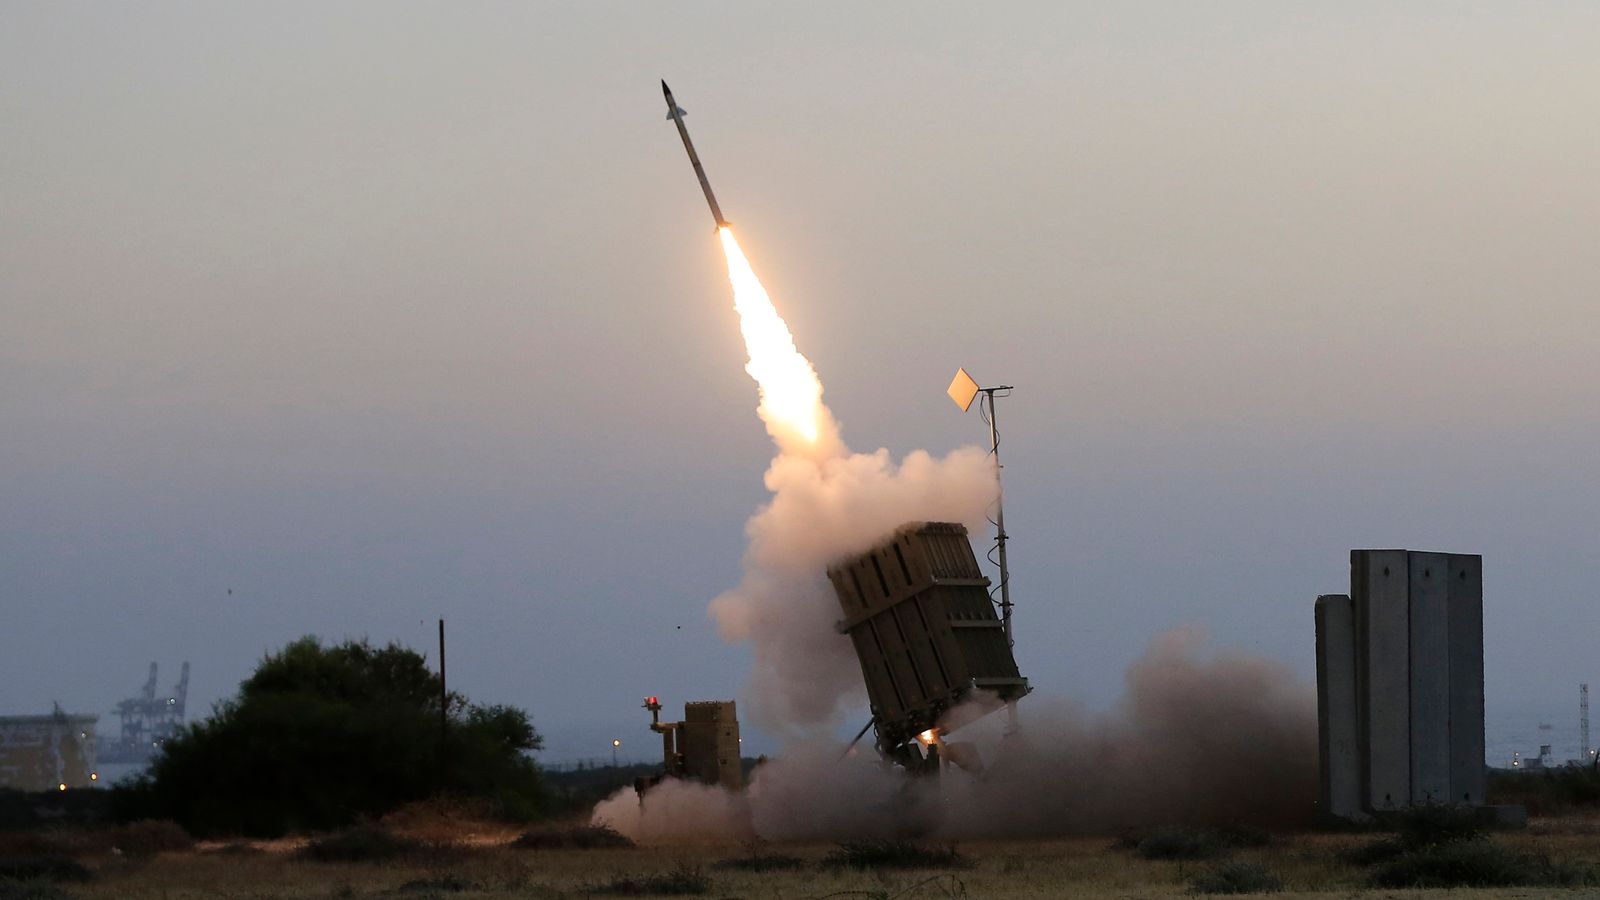 Will Israel let an attack by Iran go unpunished? Probably not